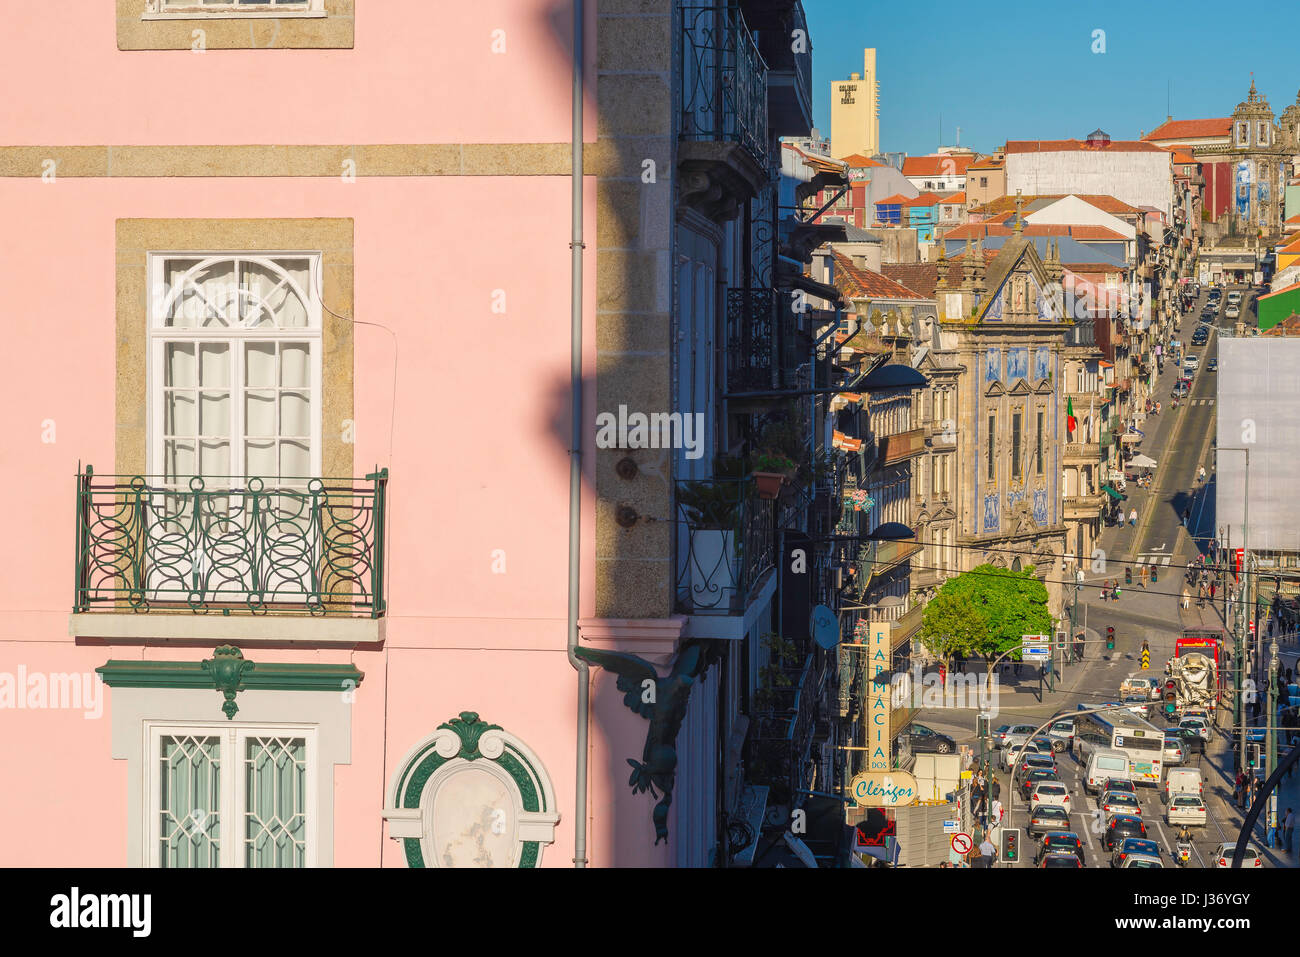 Porto Portugal center, view in summer along the Rua dos Clerigos in central Porto, with the Igreja dos Congregados in the middle distance, Portugal Stock Photo